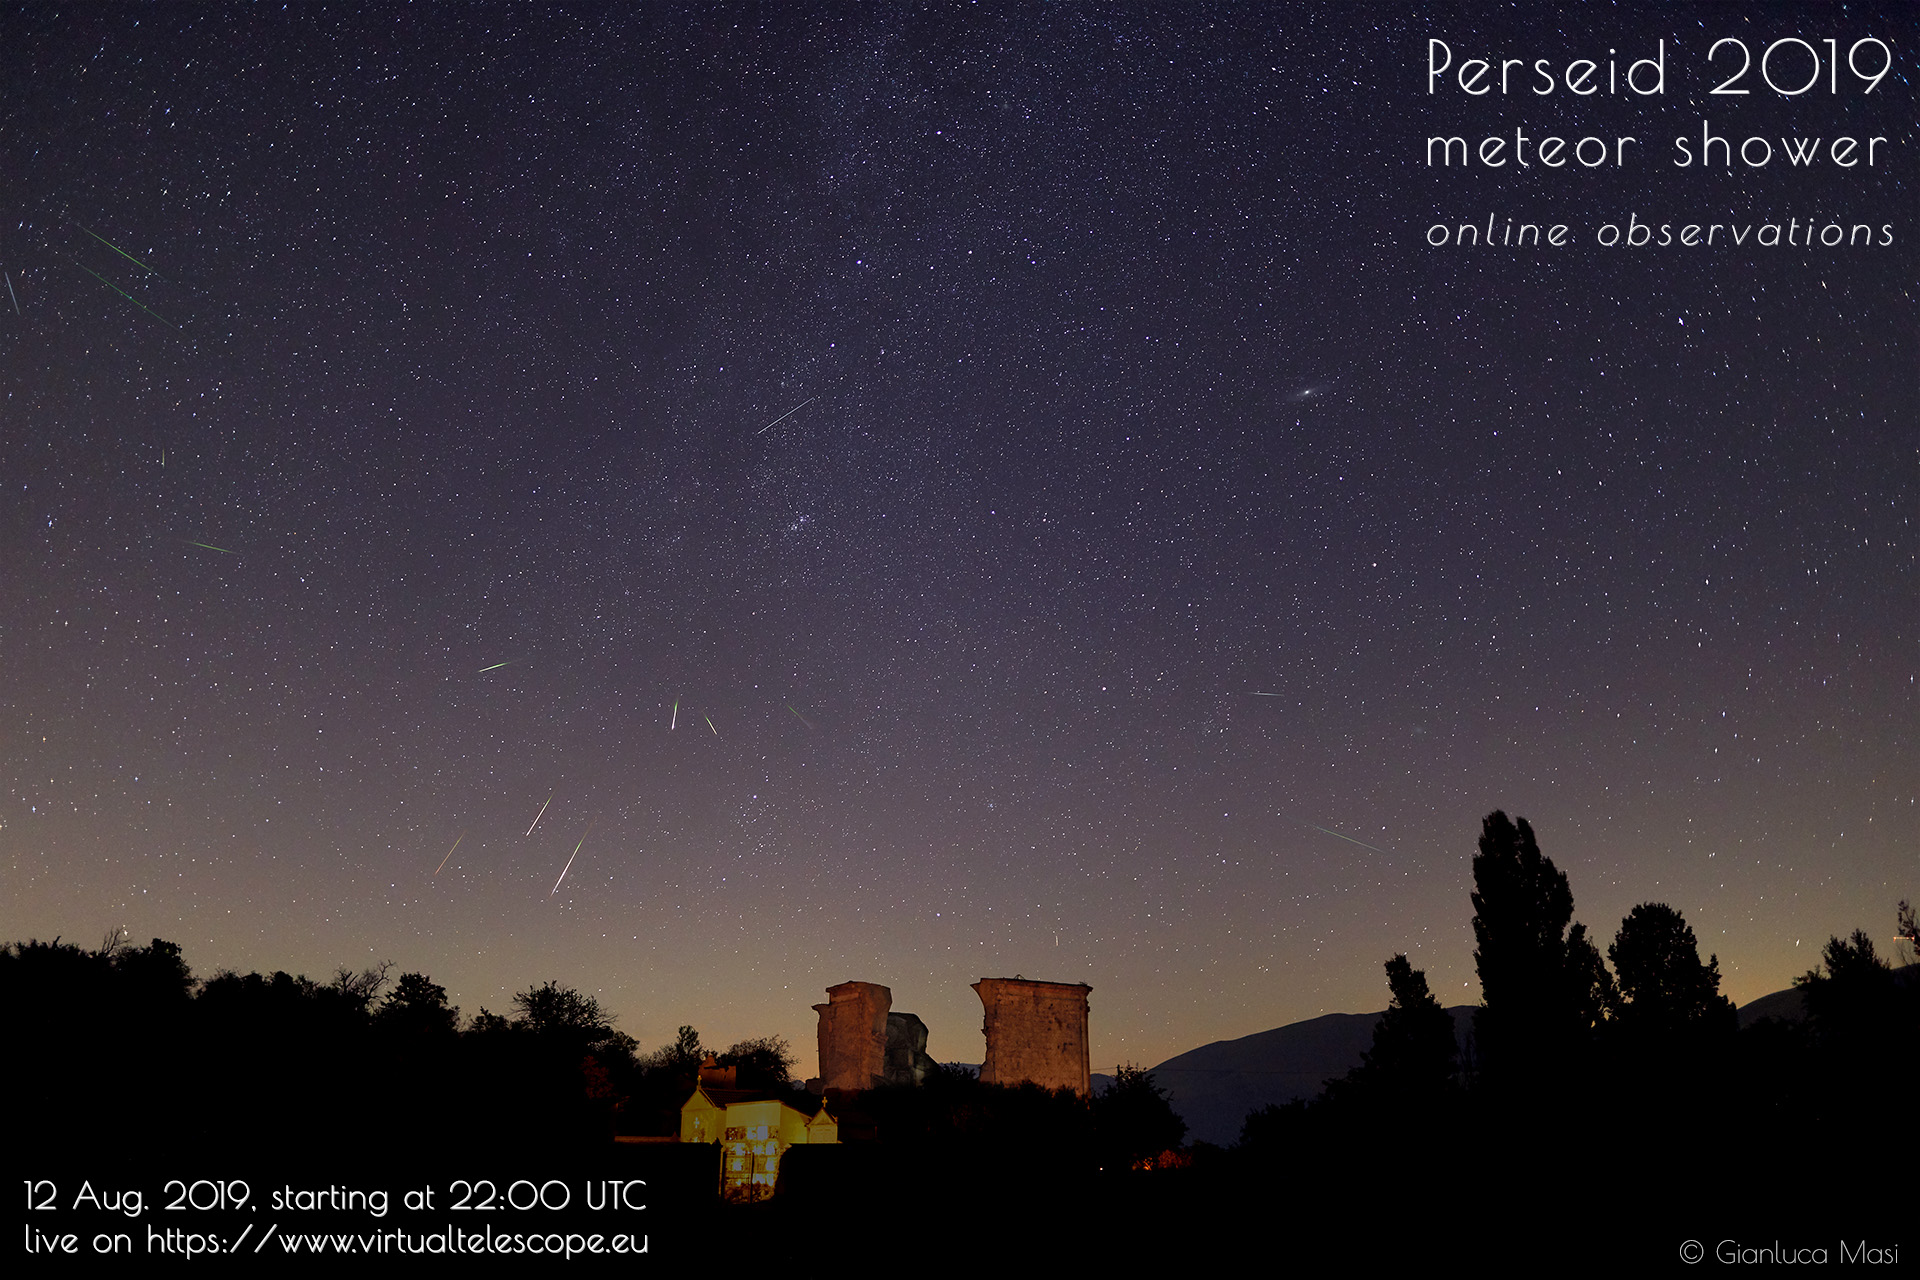 Perseids 2019: poster of the event